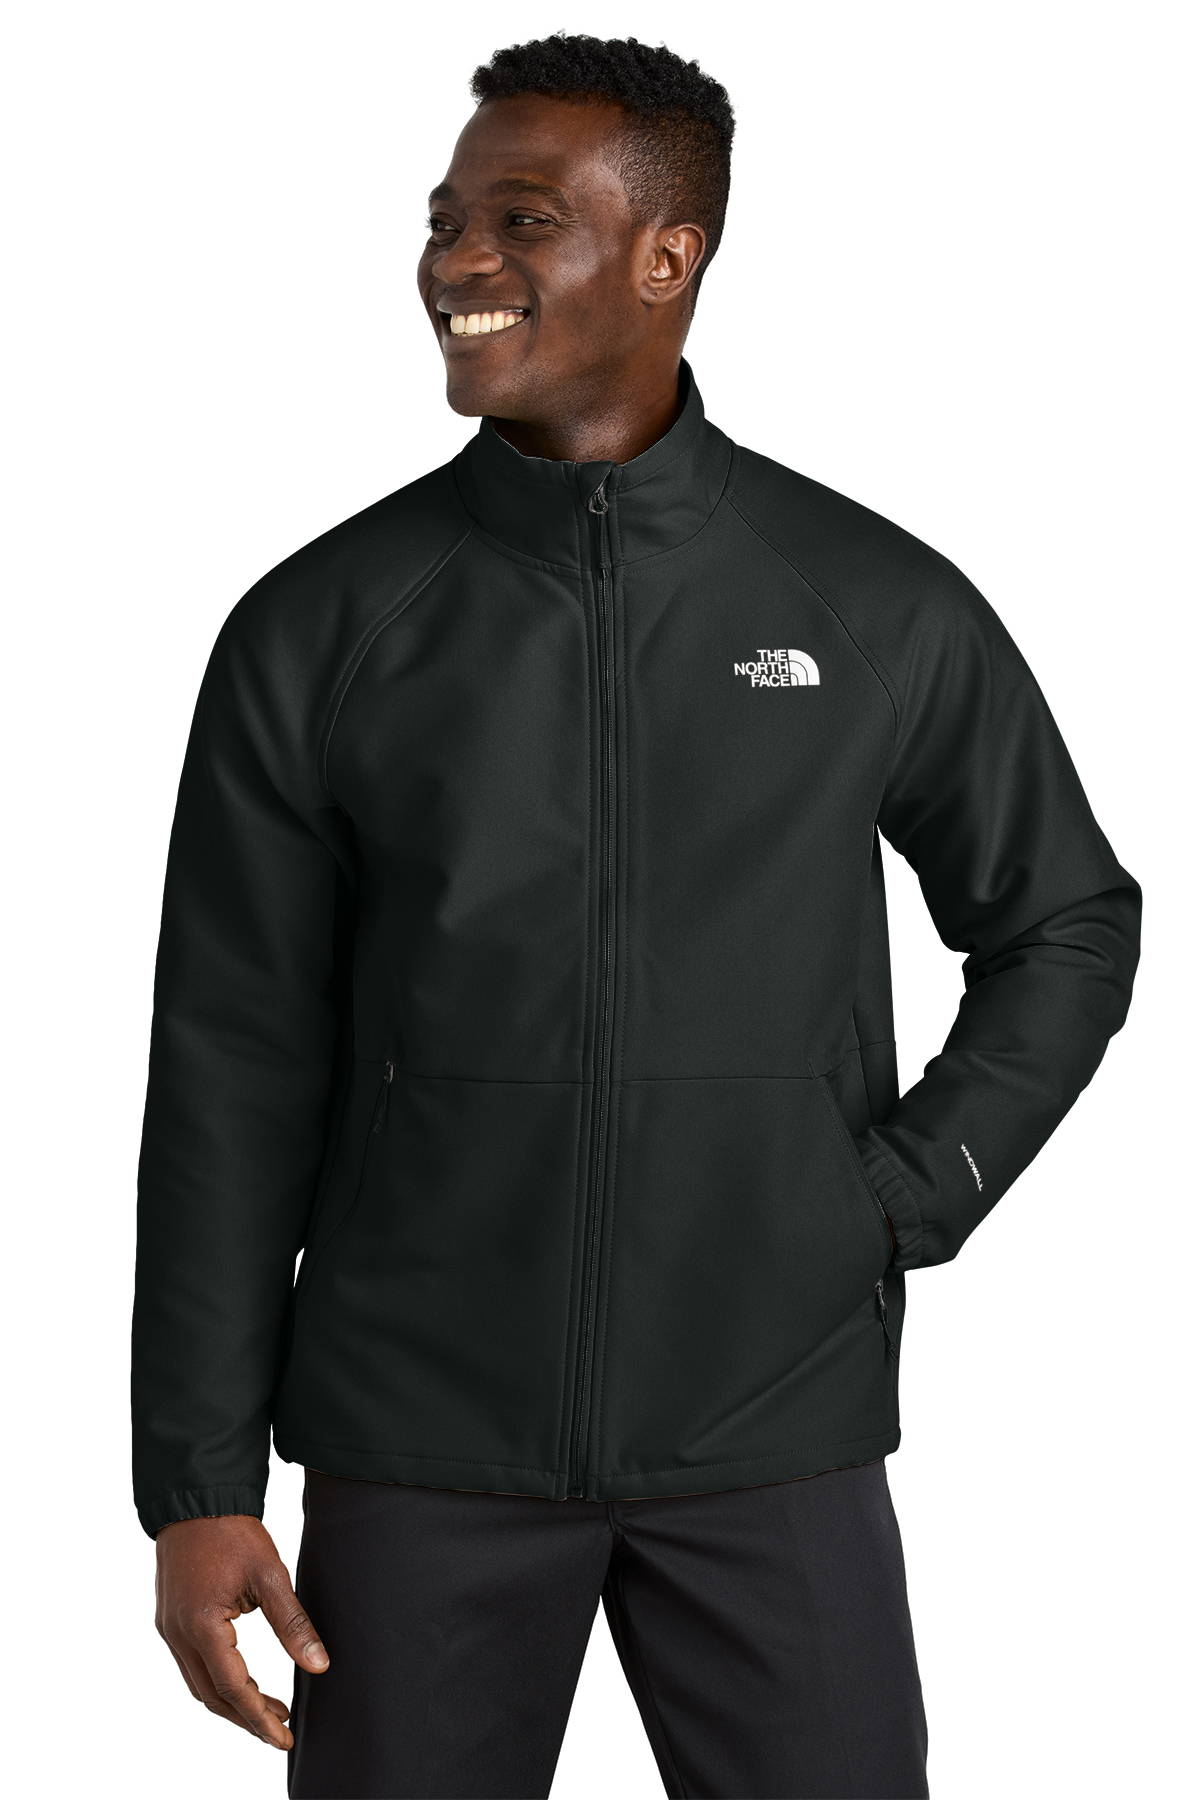 The North Face Barr Lake Soft Shell Jacket | Product | SanMar